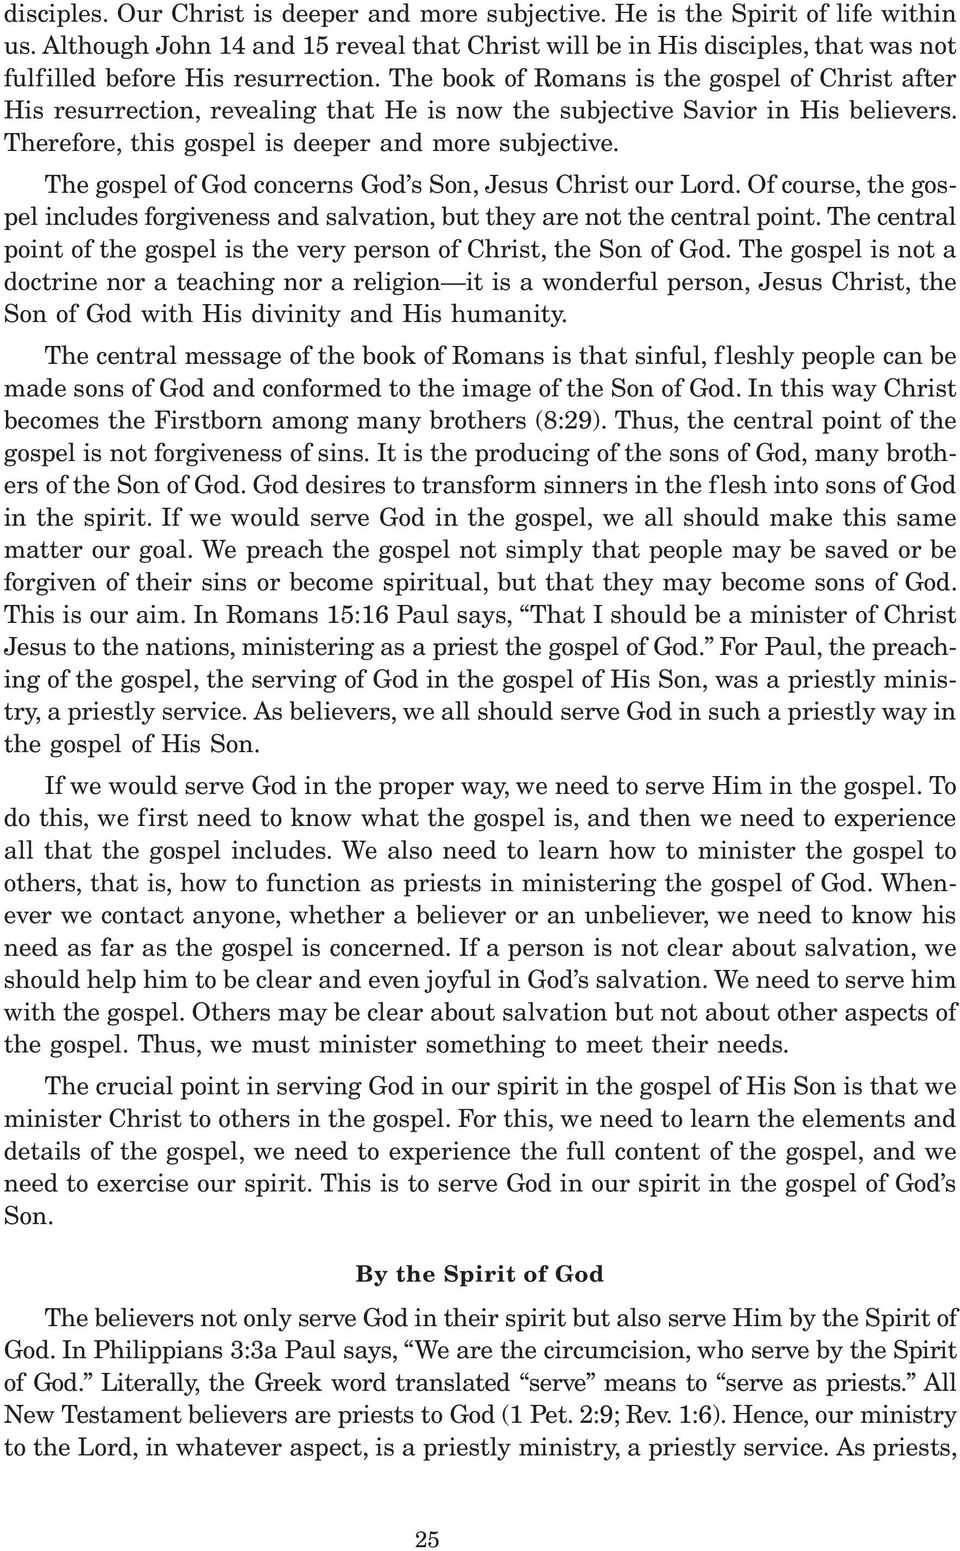 The book of Romans is the gospel of Christ after His resurrection, revealing that He is now the subjective Savior in His believers. Therefore, this gospel is deeper and more subjective.